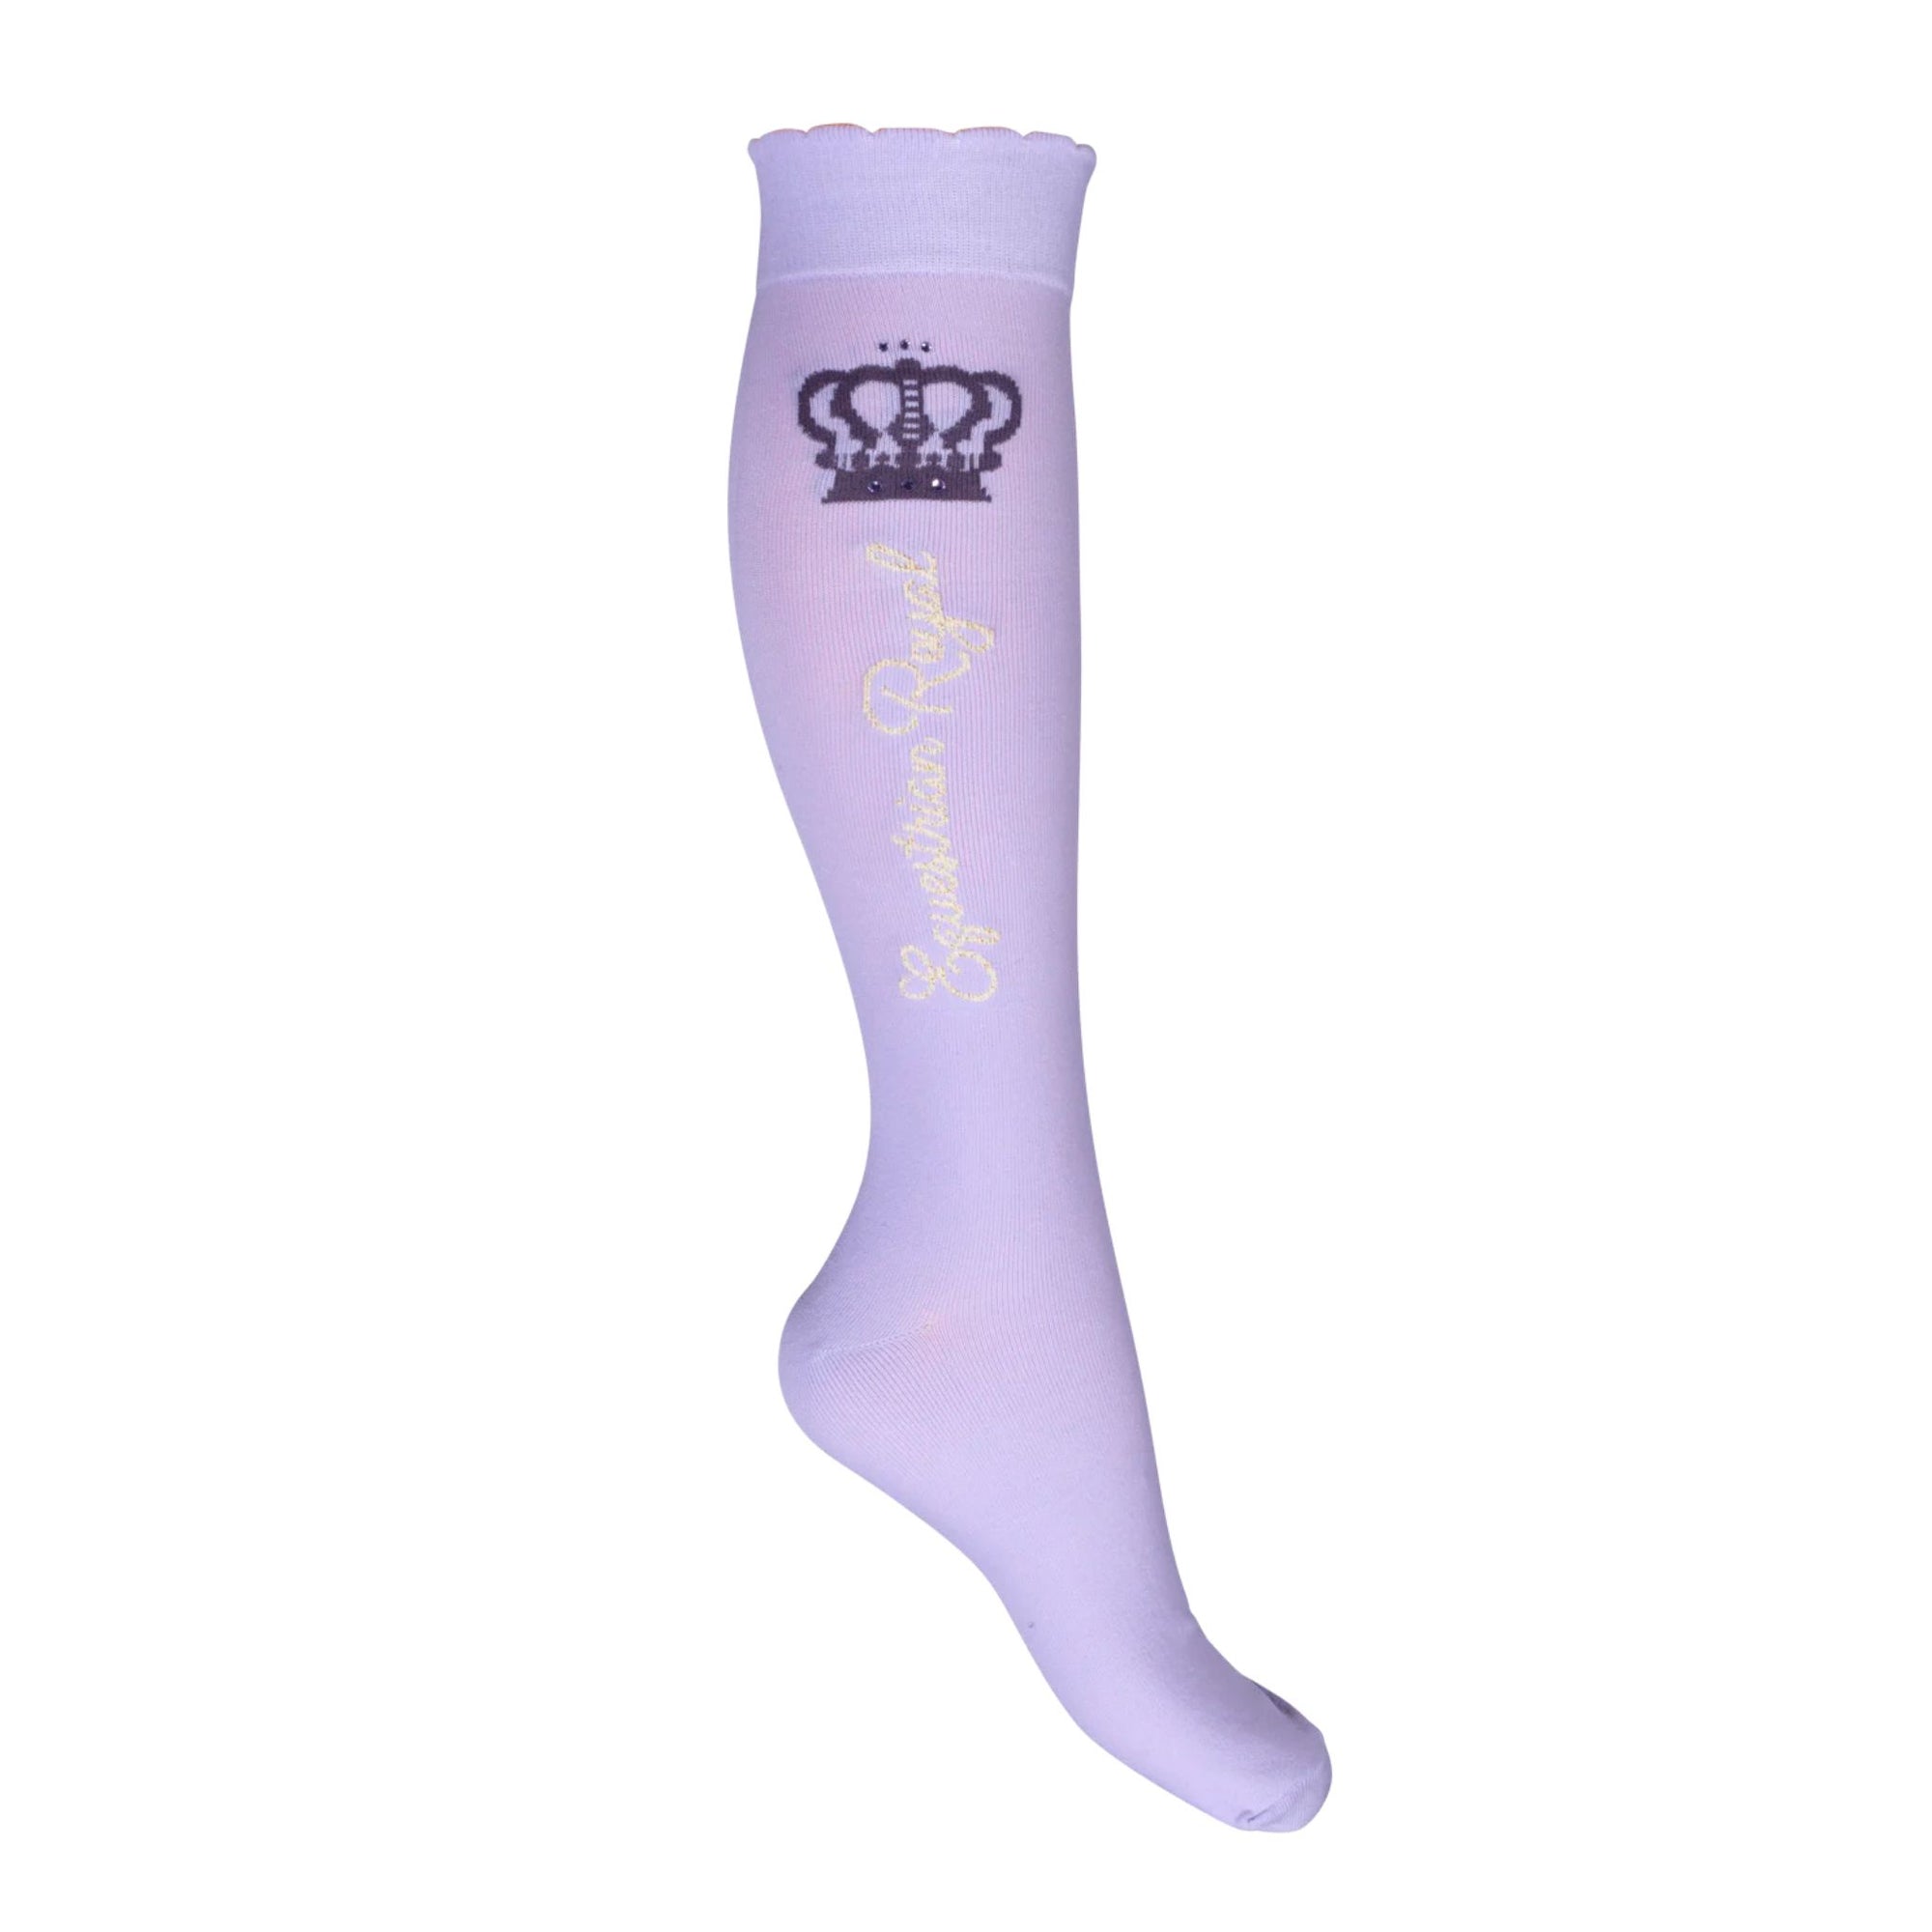 Lavender Bay socks in the colour dark lilac detailing the words "equestrian royal" down the side aswell as a crown and diamantes at the top of the socks.